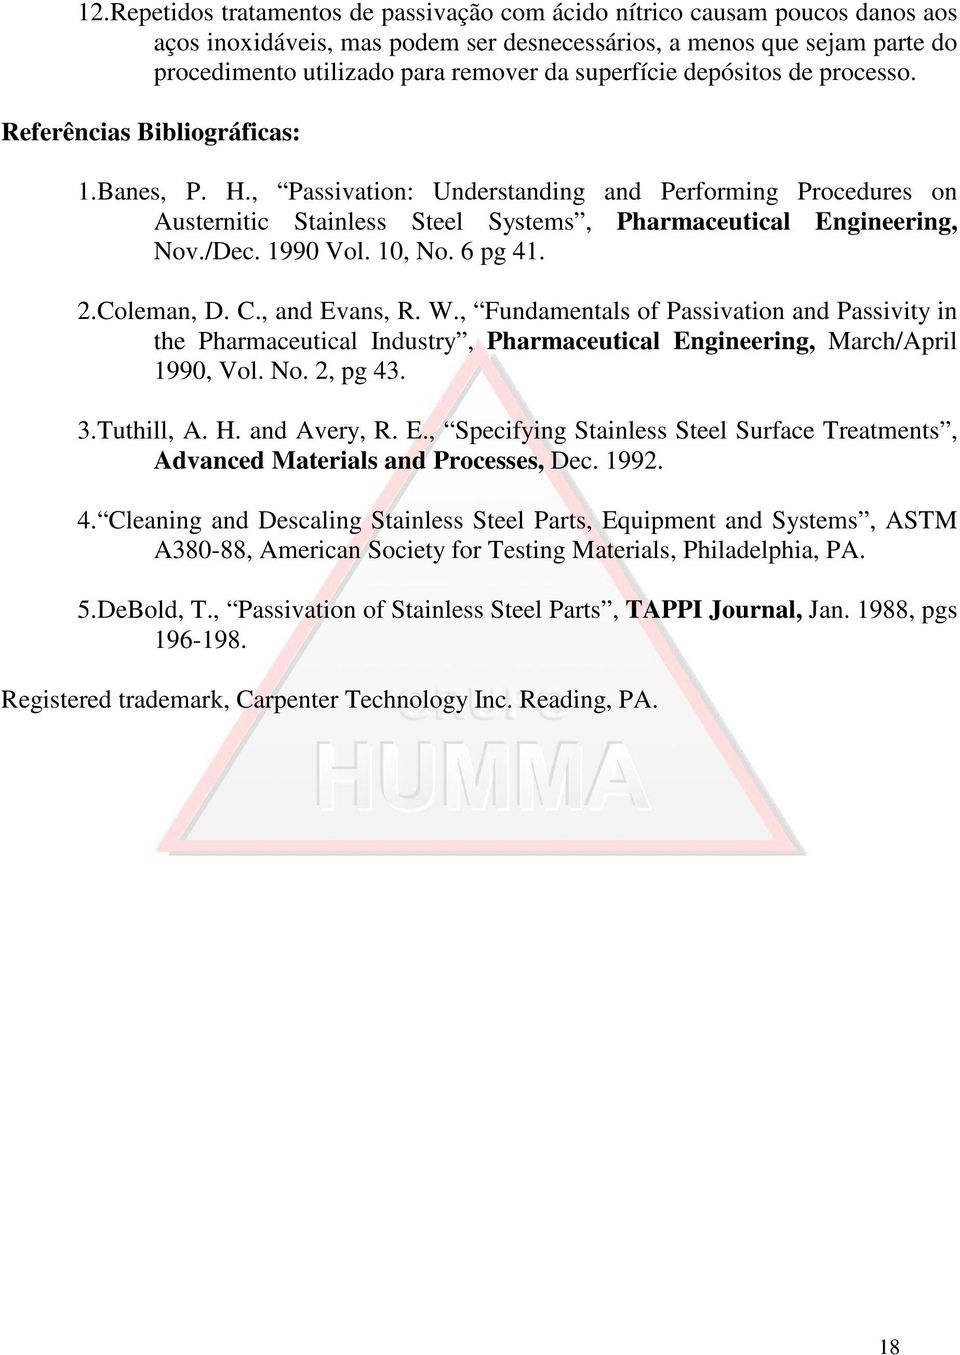 , Passivation: Understanding and Performing Procedures on Austernitic Stainless Steel Systems, Pharmaceutical Engineering, Nov./Dec. 1990 Vol. 10, No. 6 pg 41. 2.Coleman, D. C., and Evans, R. W.